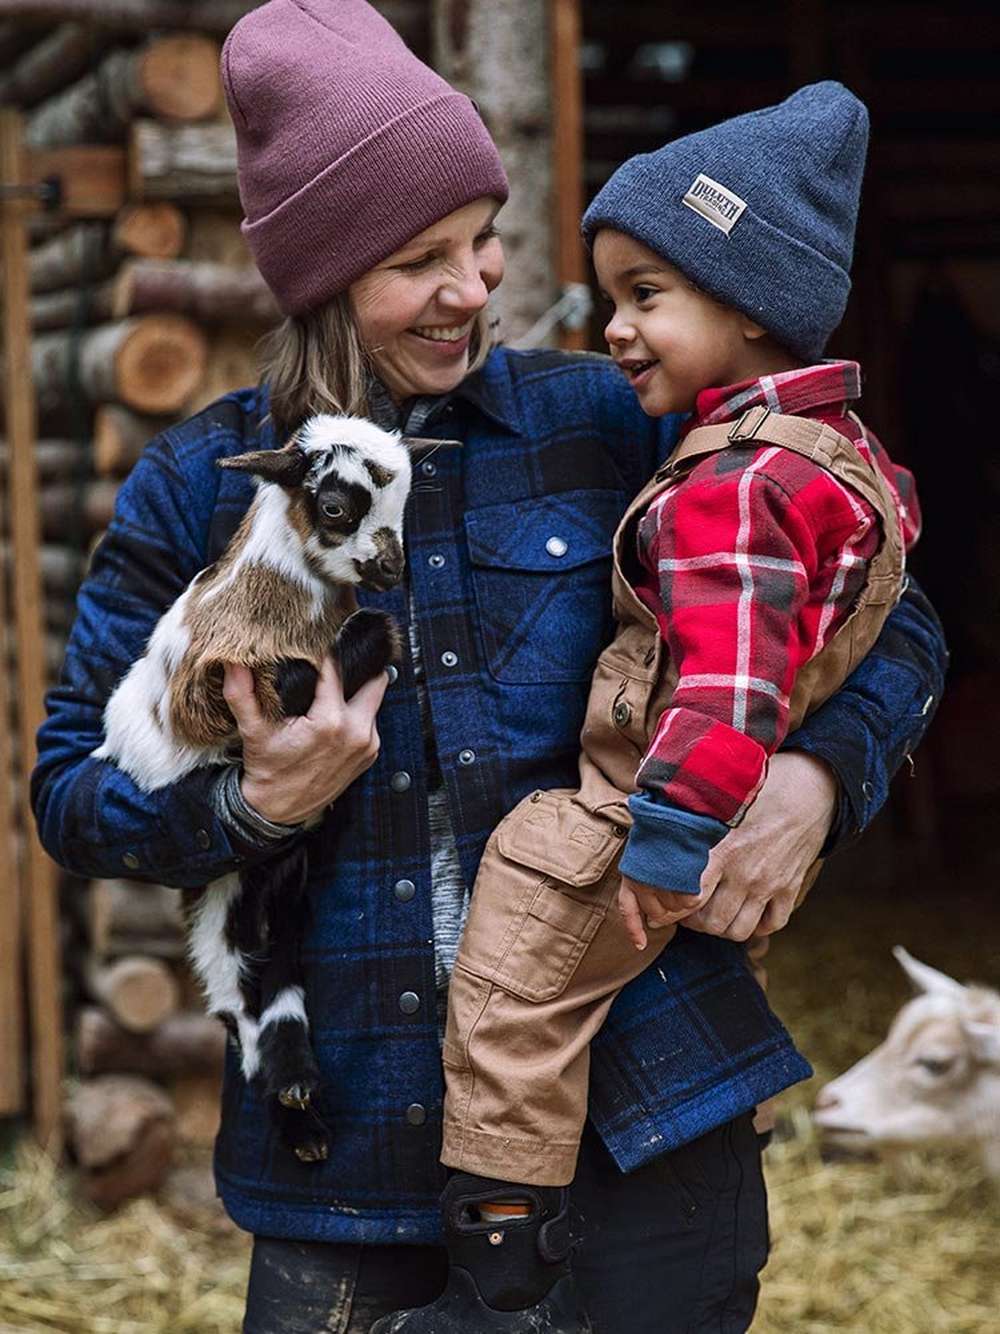 woman and child wearing flannel shirts and carrying a baby goat